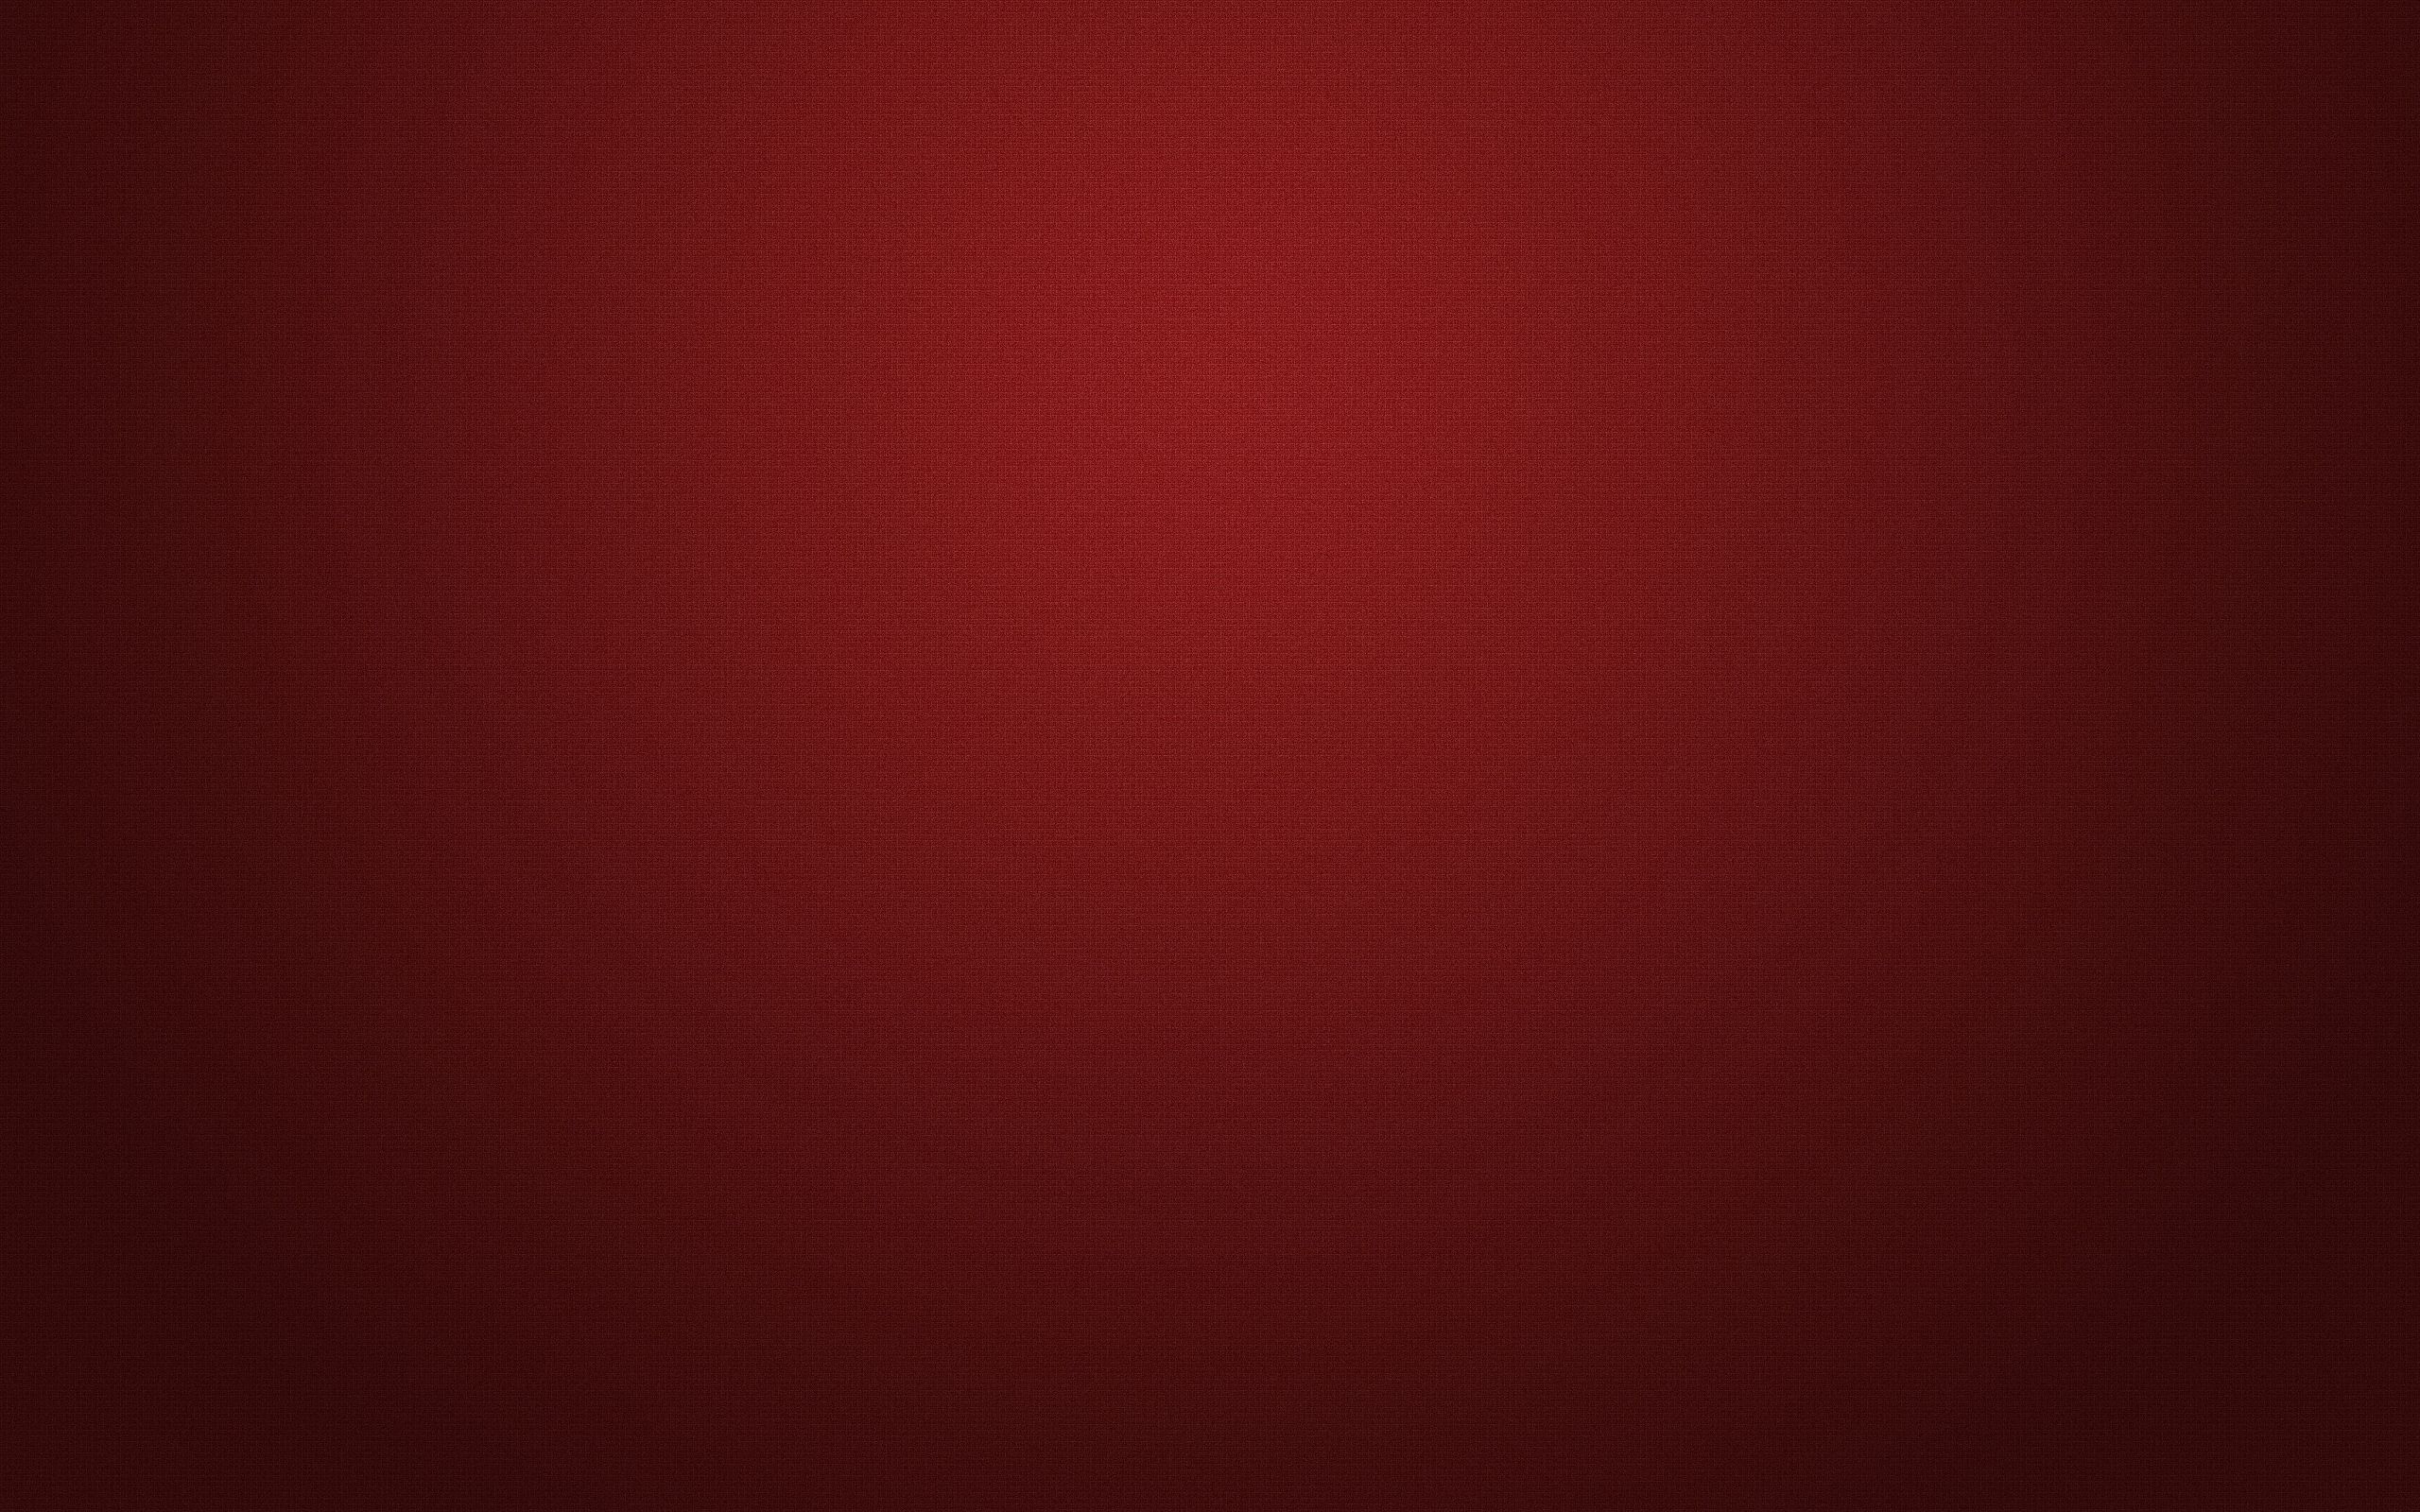 Newest Mobile Wallpaper Texture